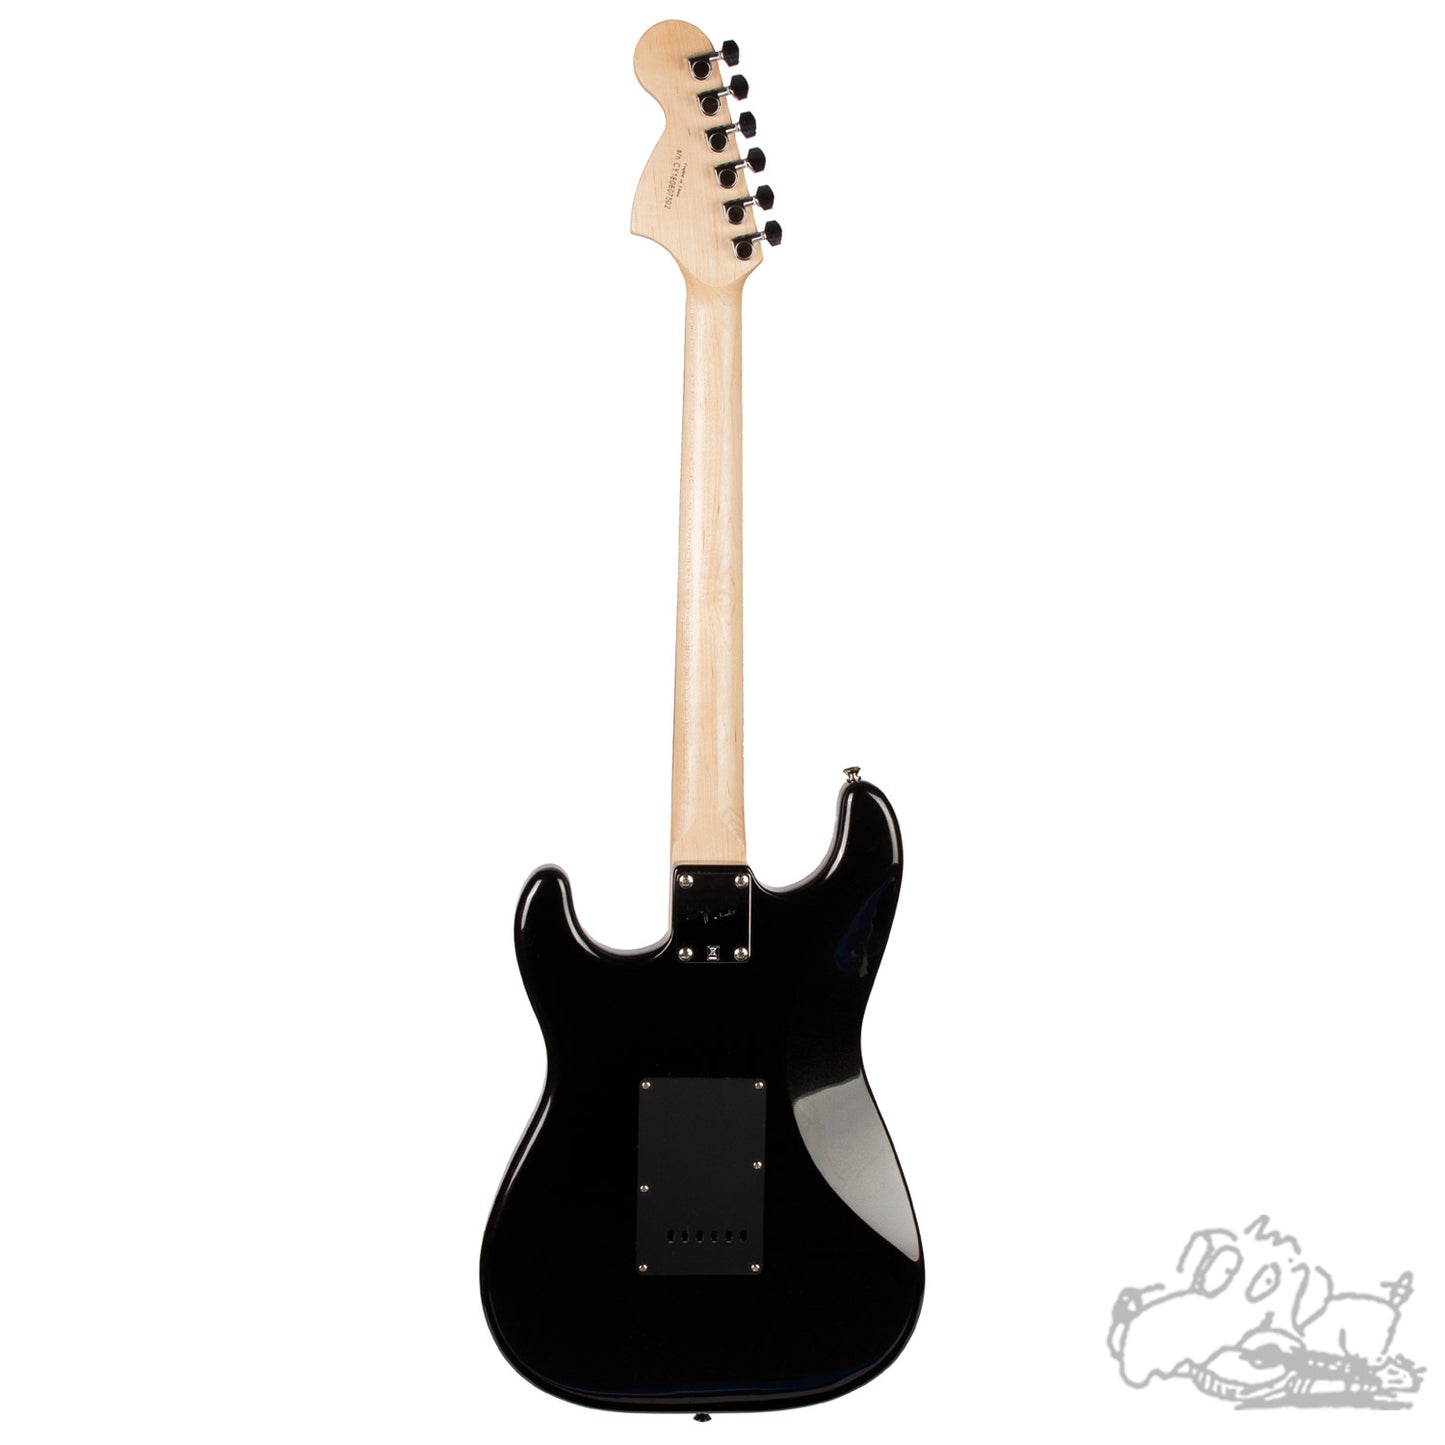 Used Squier Affinity HSS Stratocaster - Black with Sparkle Pickguard